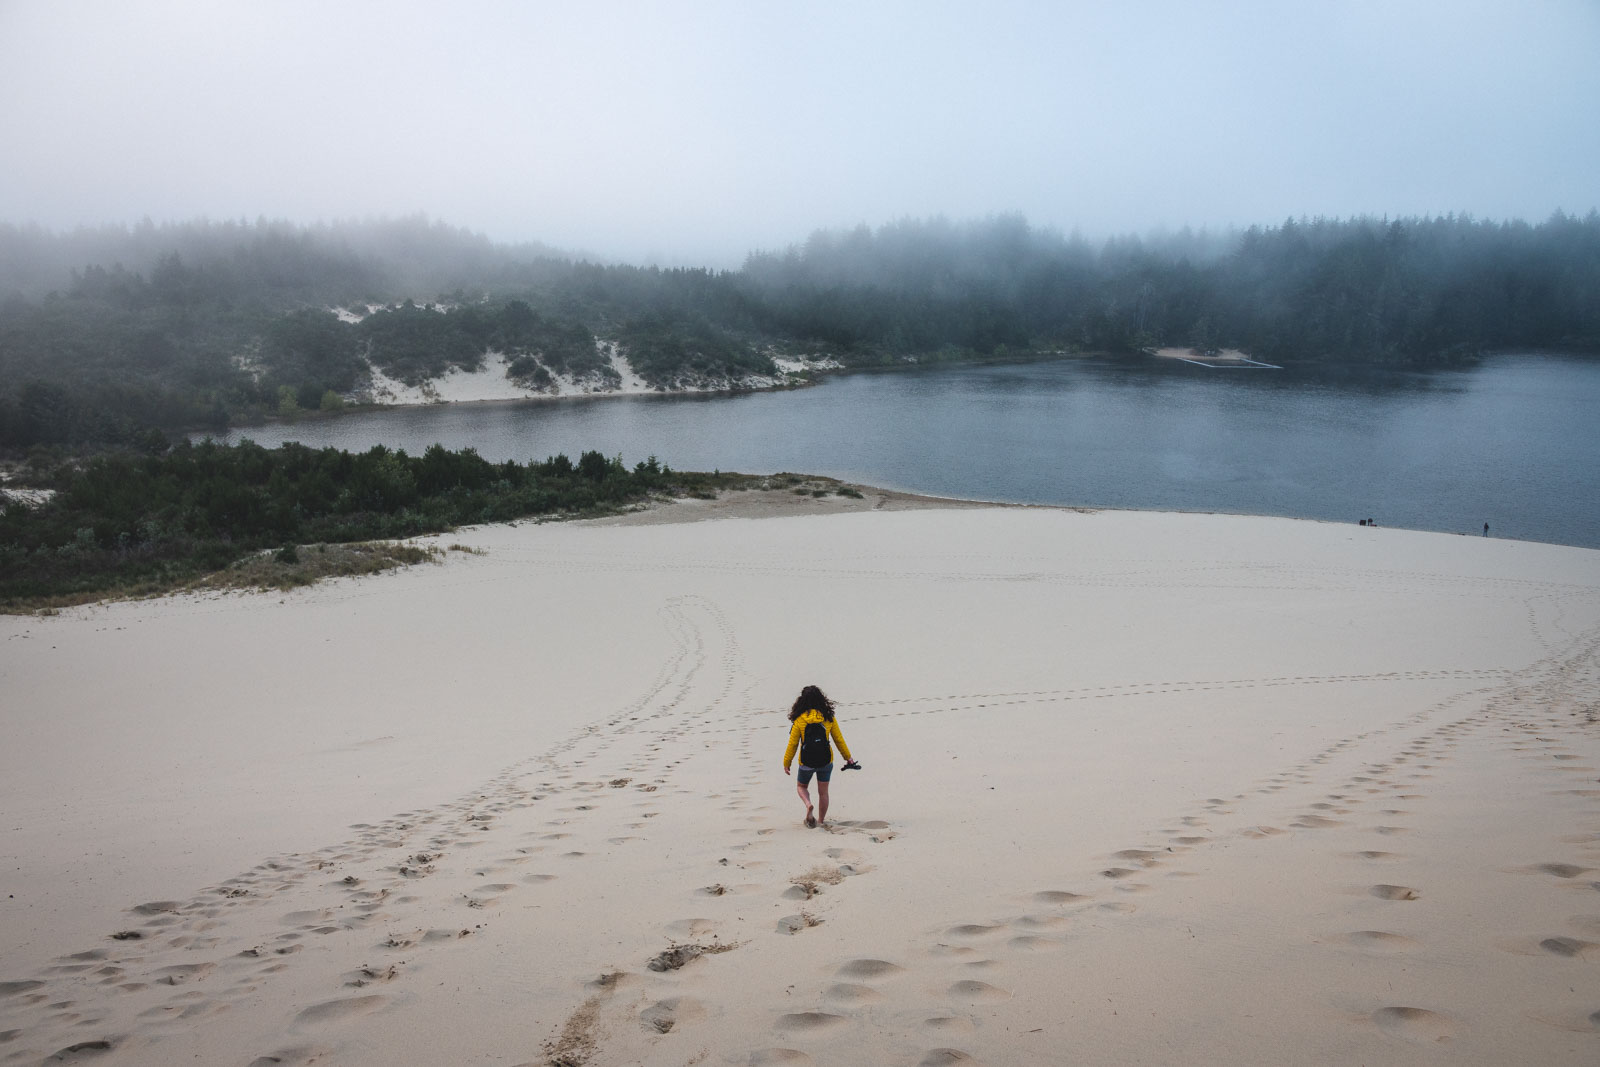 Person walking on beach in the distance on a foggy day at Jessie M. Honeyman State Park.